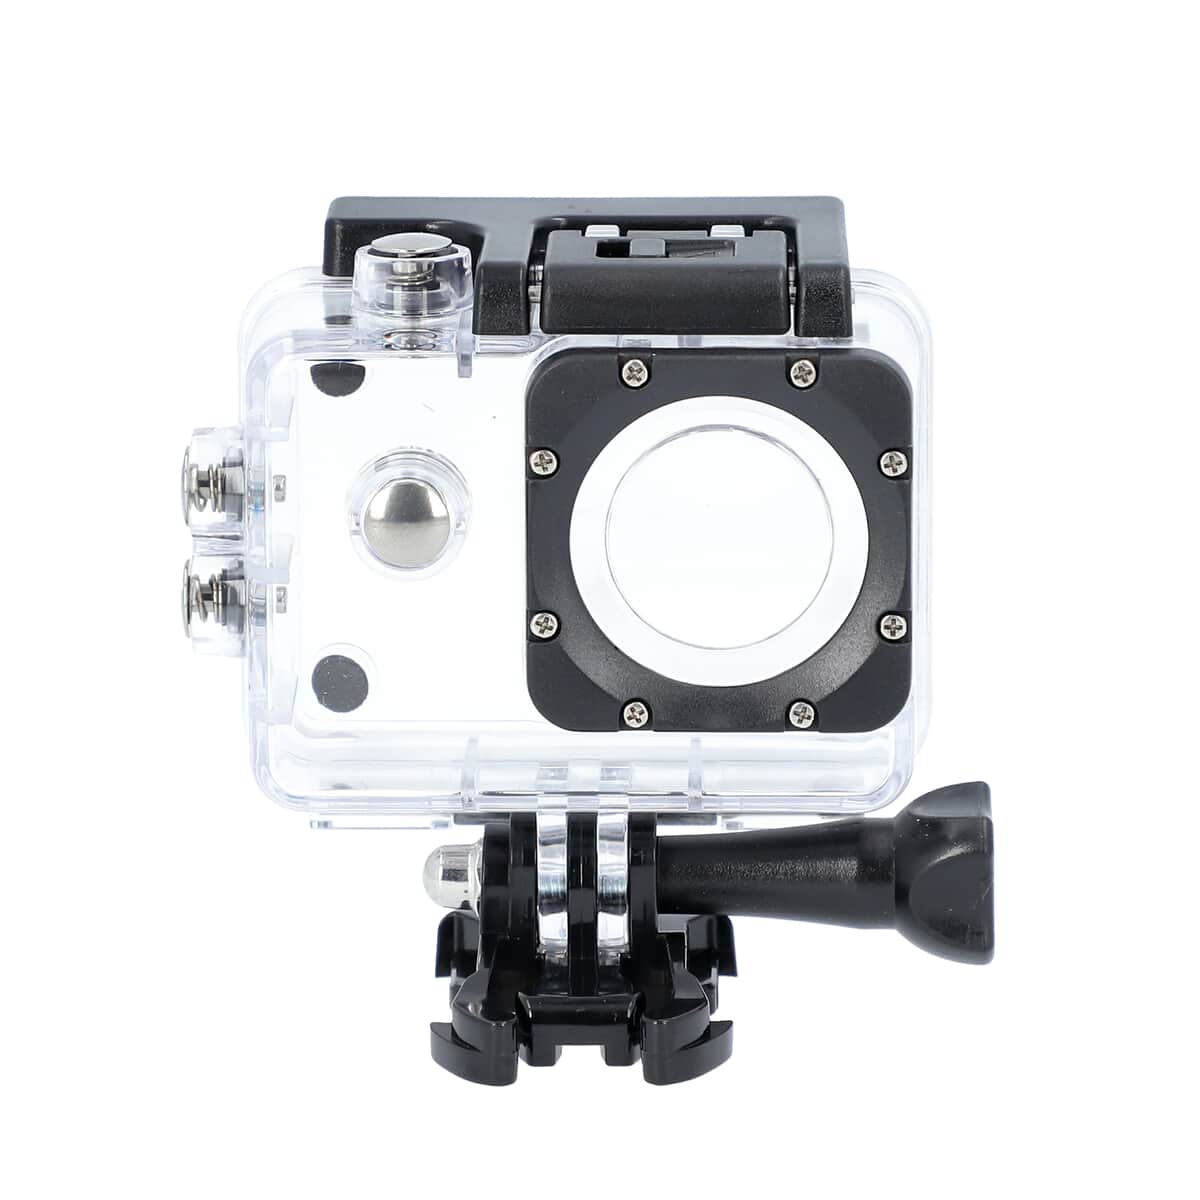 Waterproof 1080P Action Camera with 8GB TF Cards - White image number 5